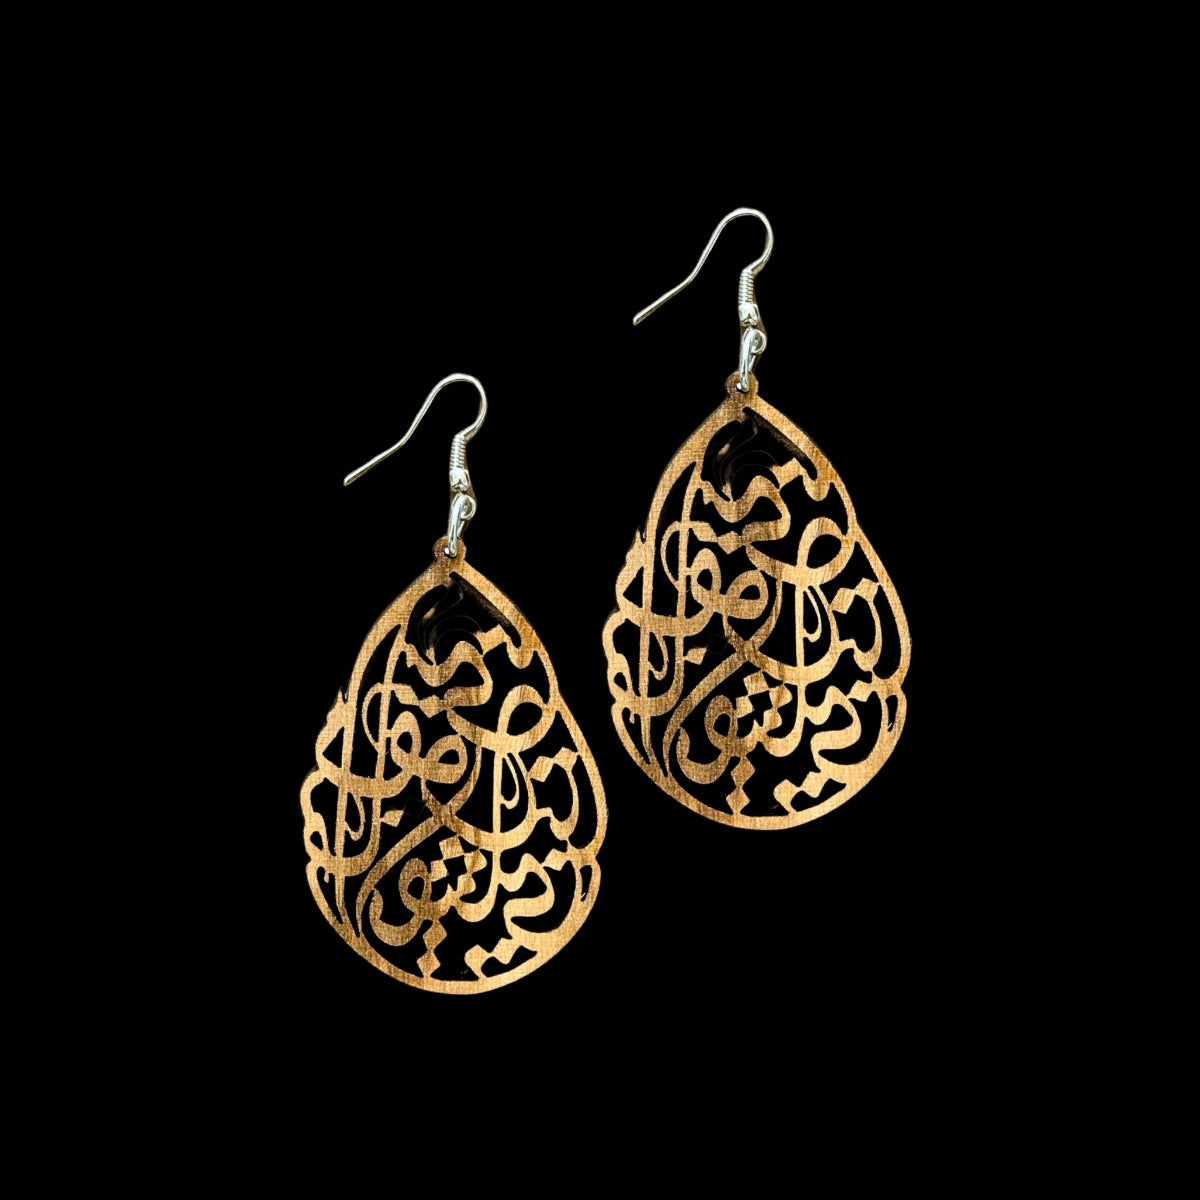 Olivewood Arabic Calligraphy Earrings "What doesn't kill me..."